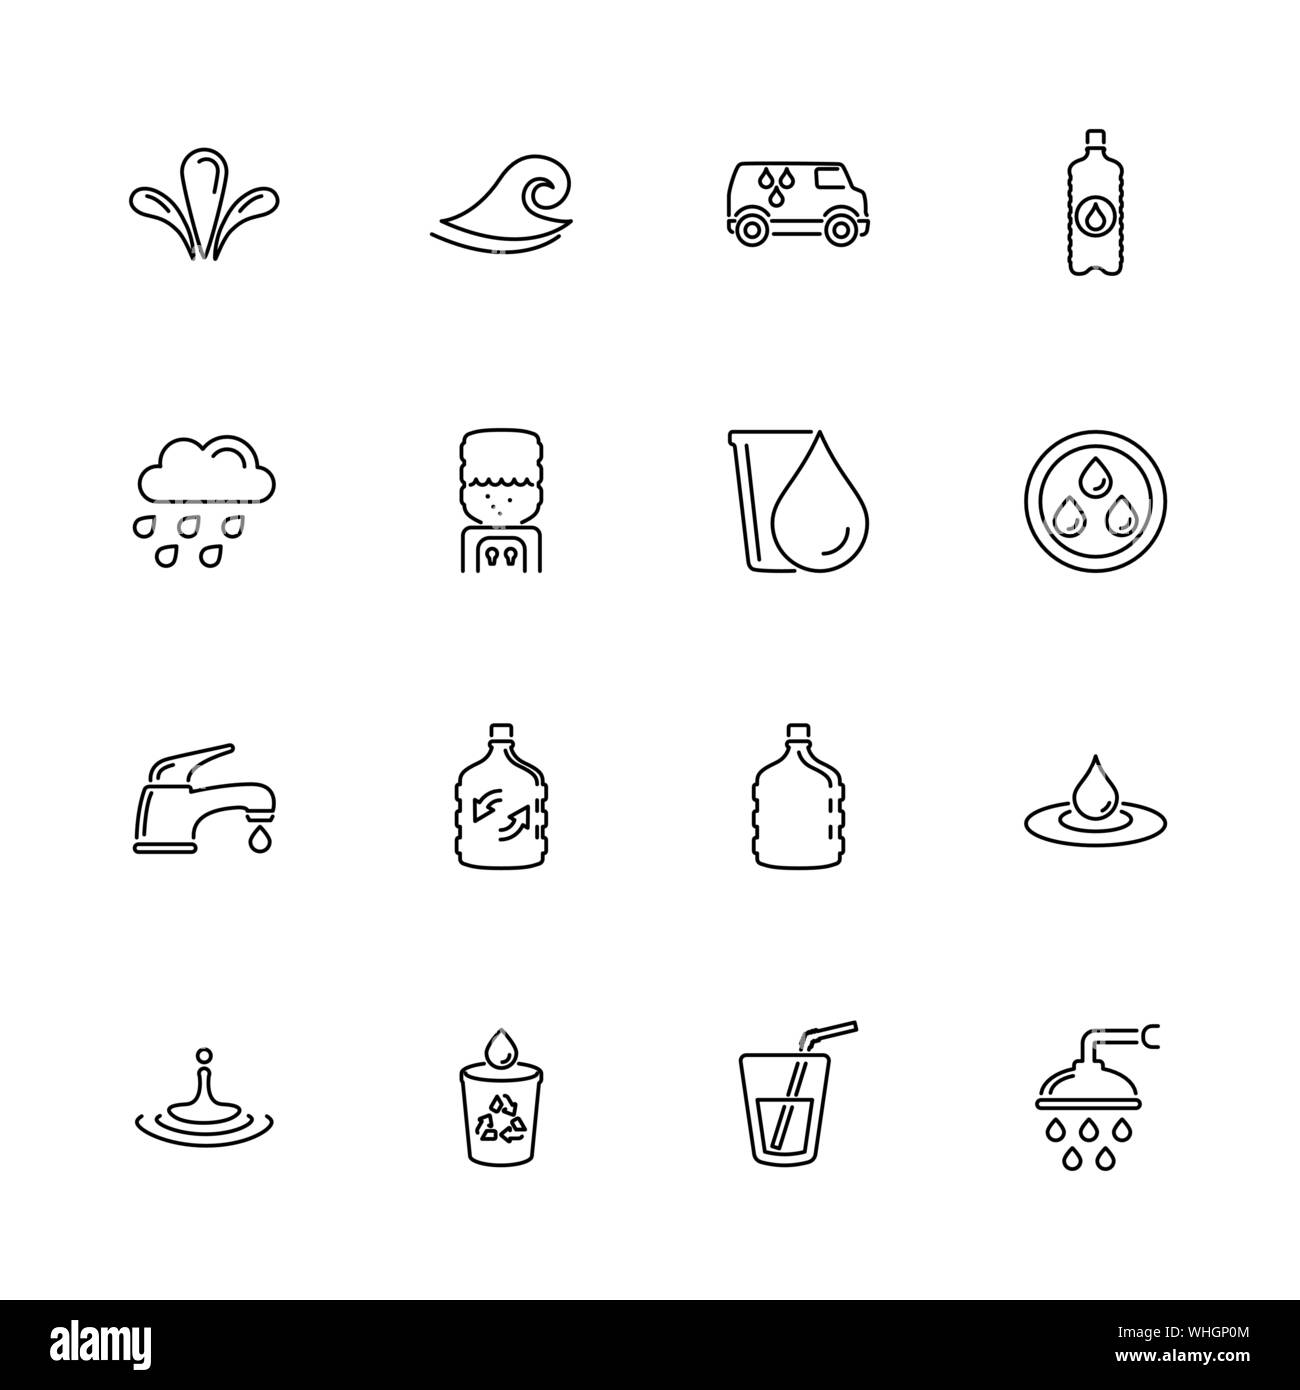 Water, Liquid outline icons set - Black symbol on white background. Water, Liquid Simple Illustration Symbol - lined simplicity Sign. Flat Vector thin Stock Vector